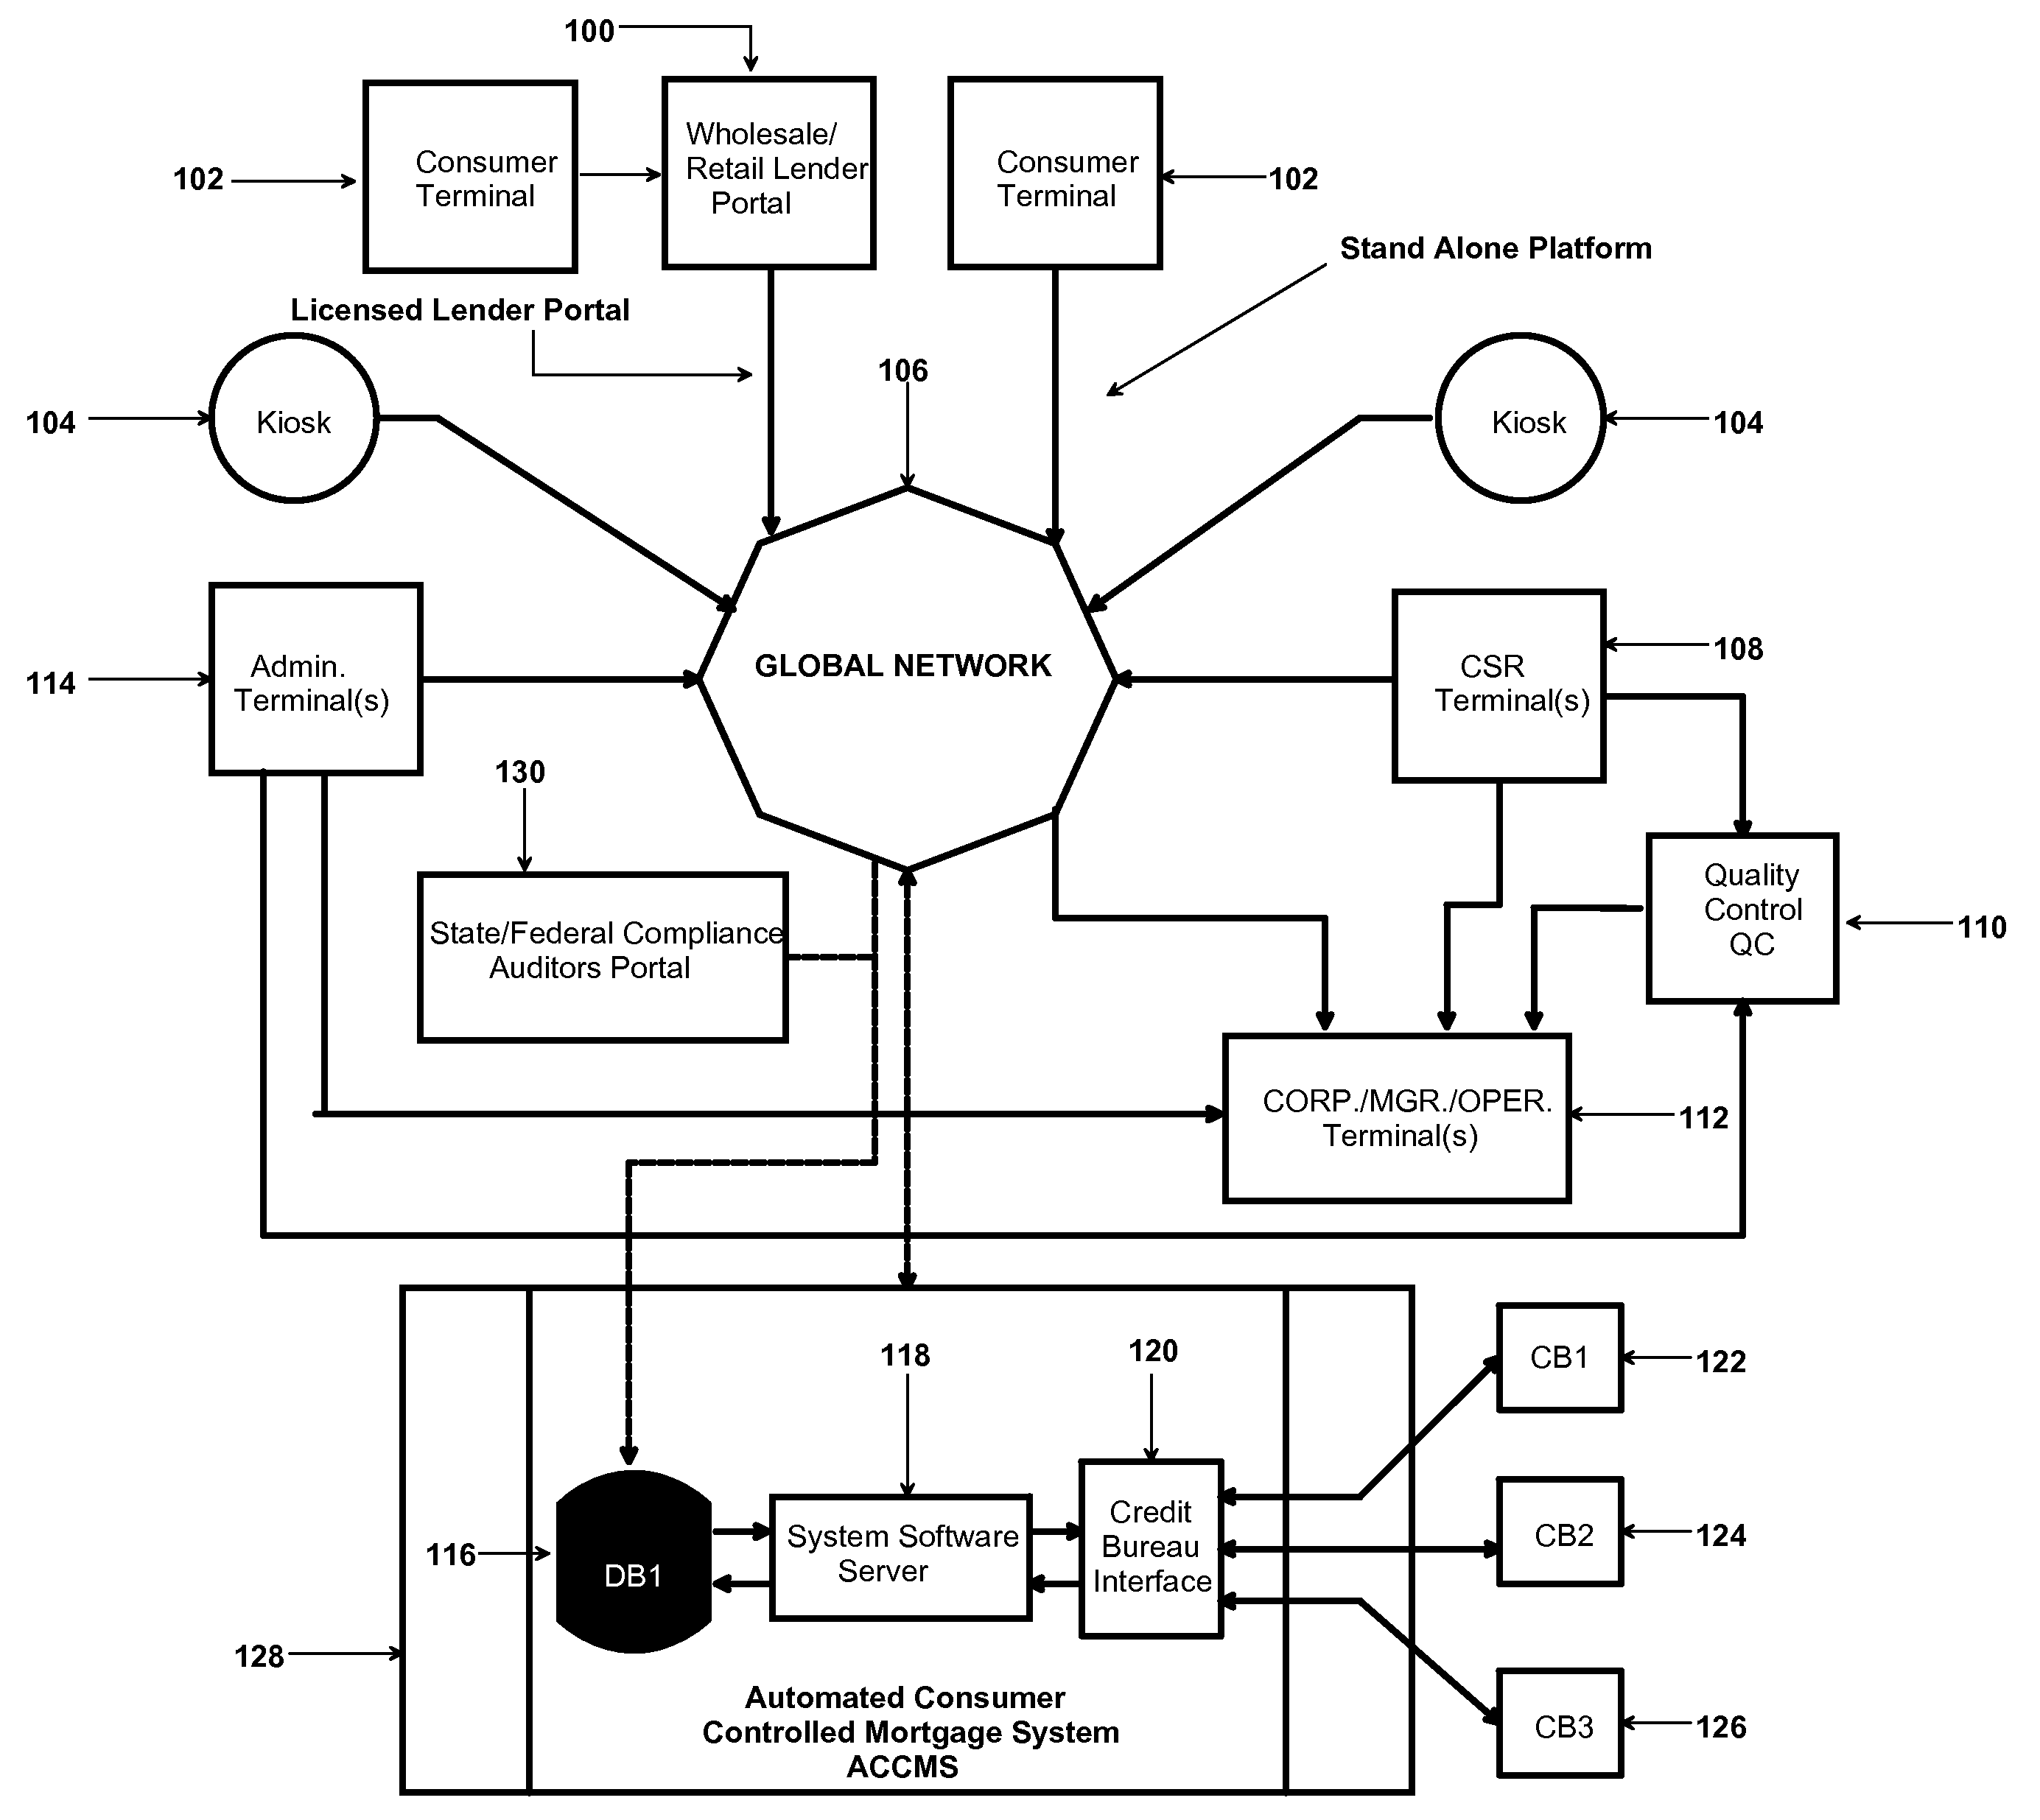 Process for an inclusive automated consumer controlled mortgage system (ACCMS) containing an automated mortgage monitoring and government compliance auditing system